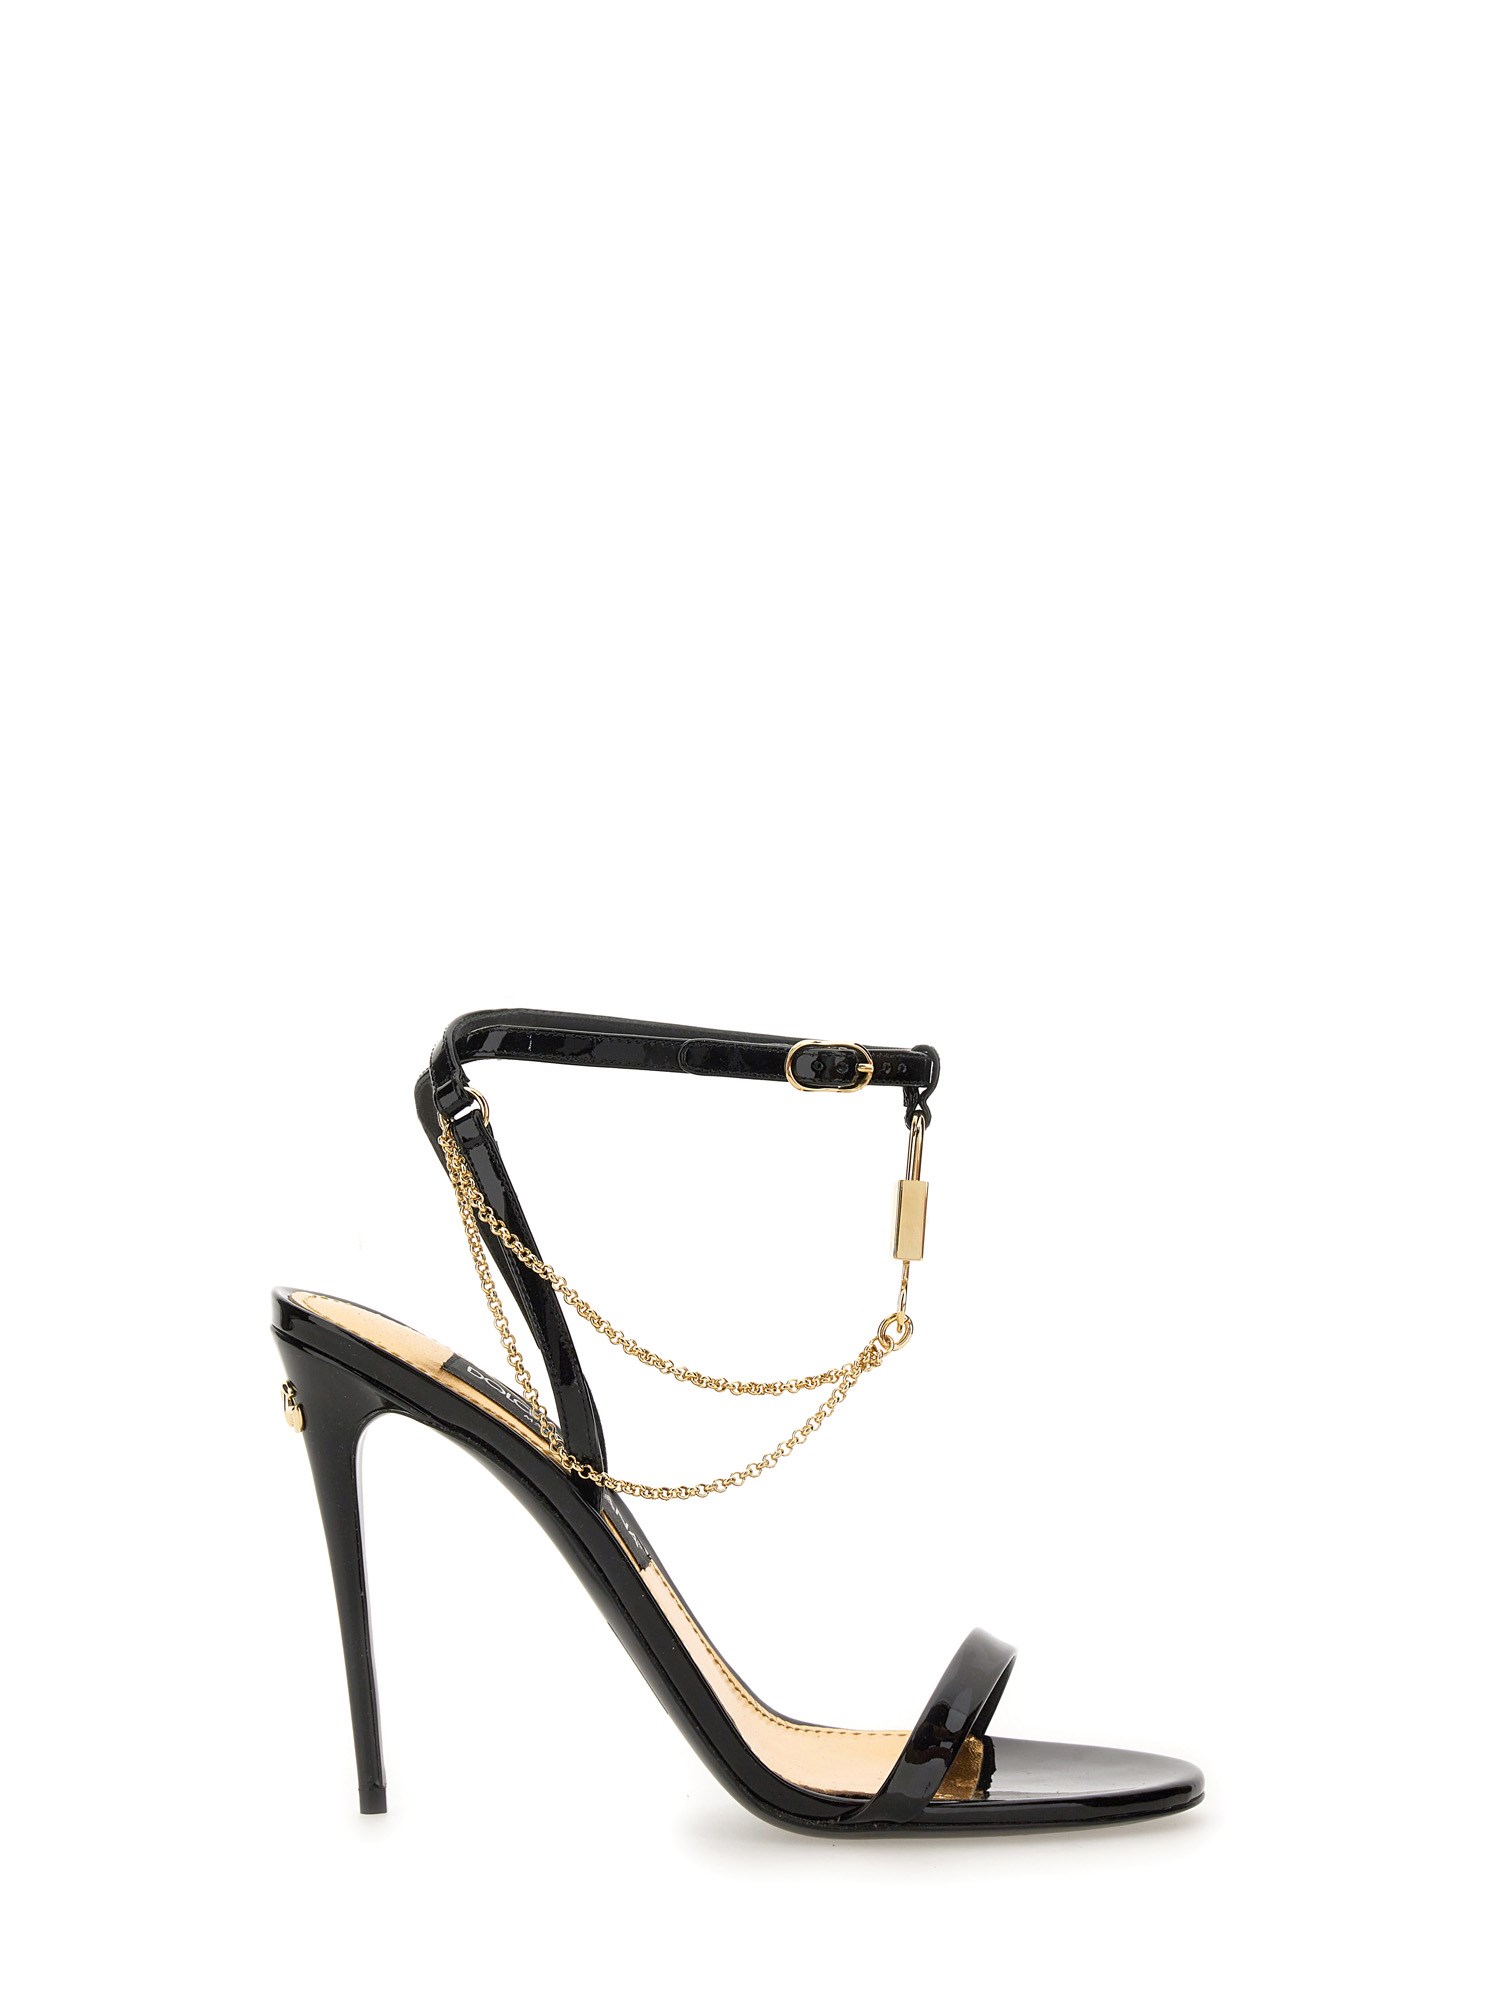 dolce & gabbana sandal with chain and charm